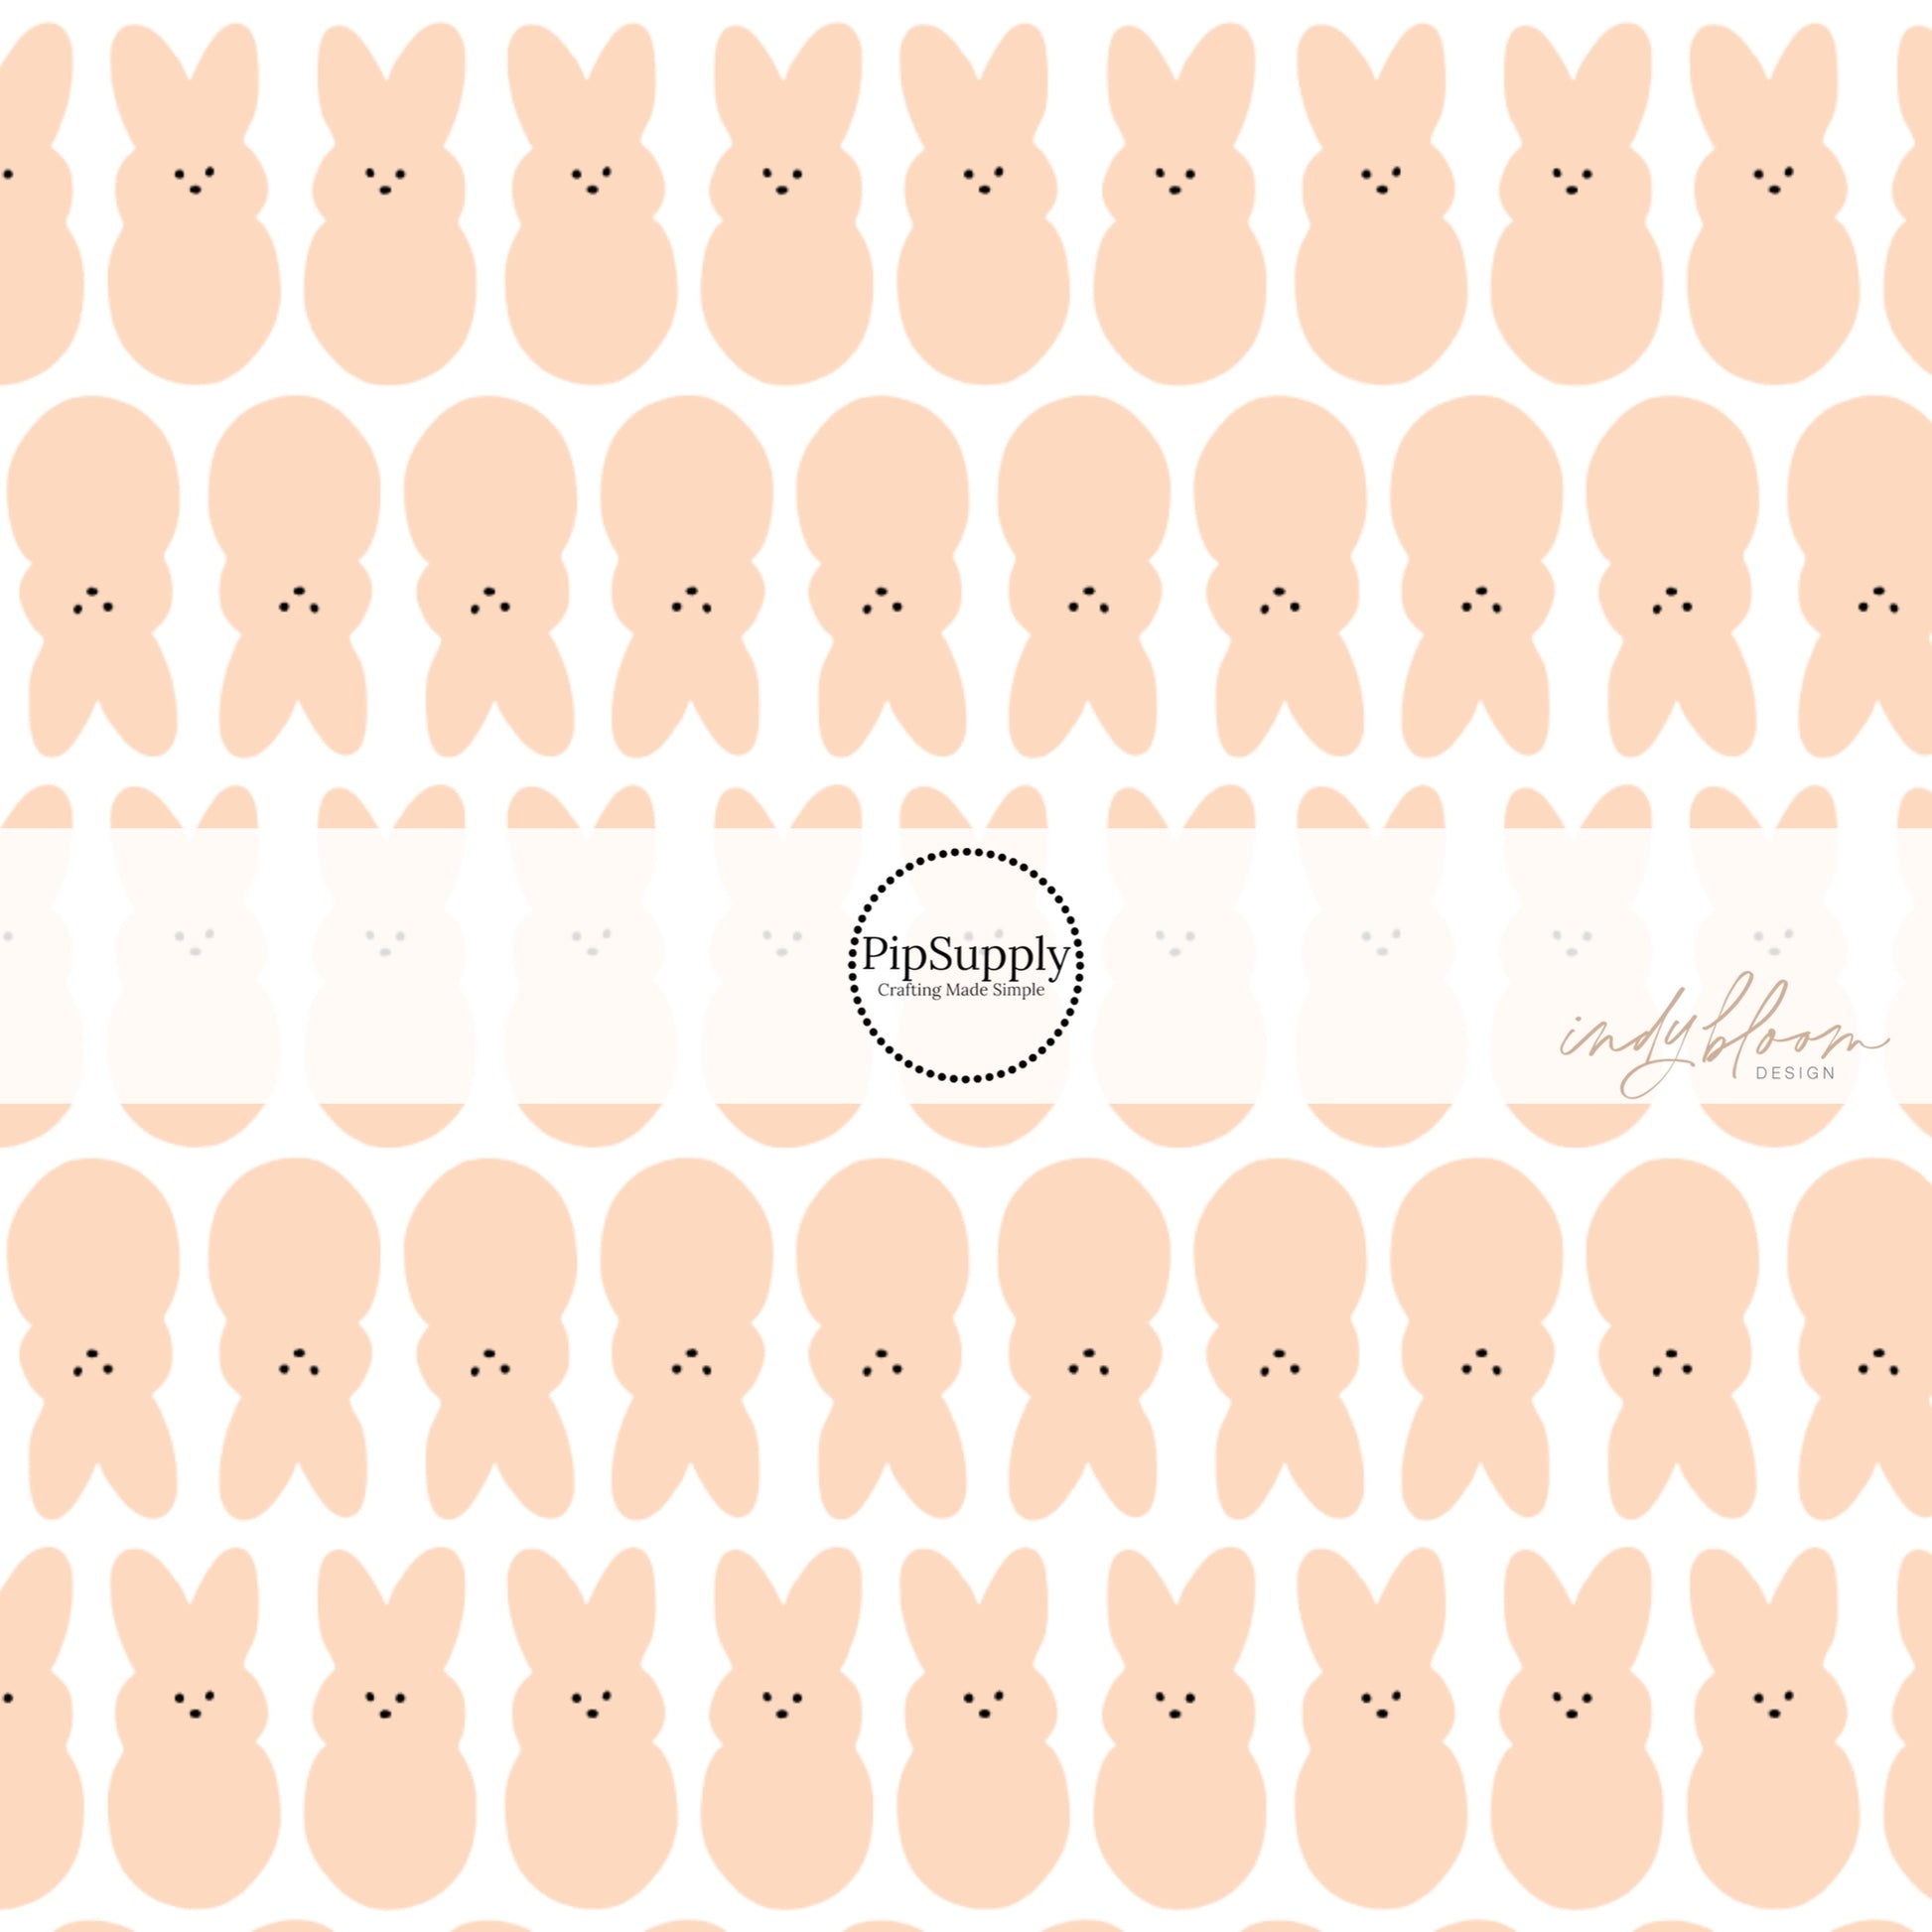 blush bunnies in rows on white fabric by the yard - Indy Bloom Easter Bunny Fabric 